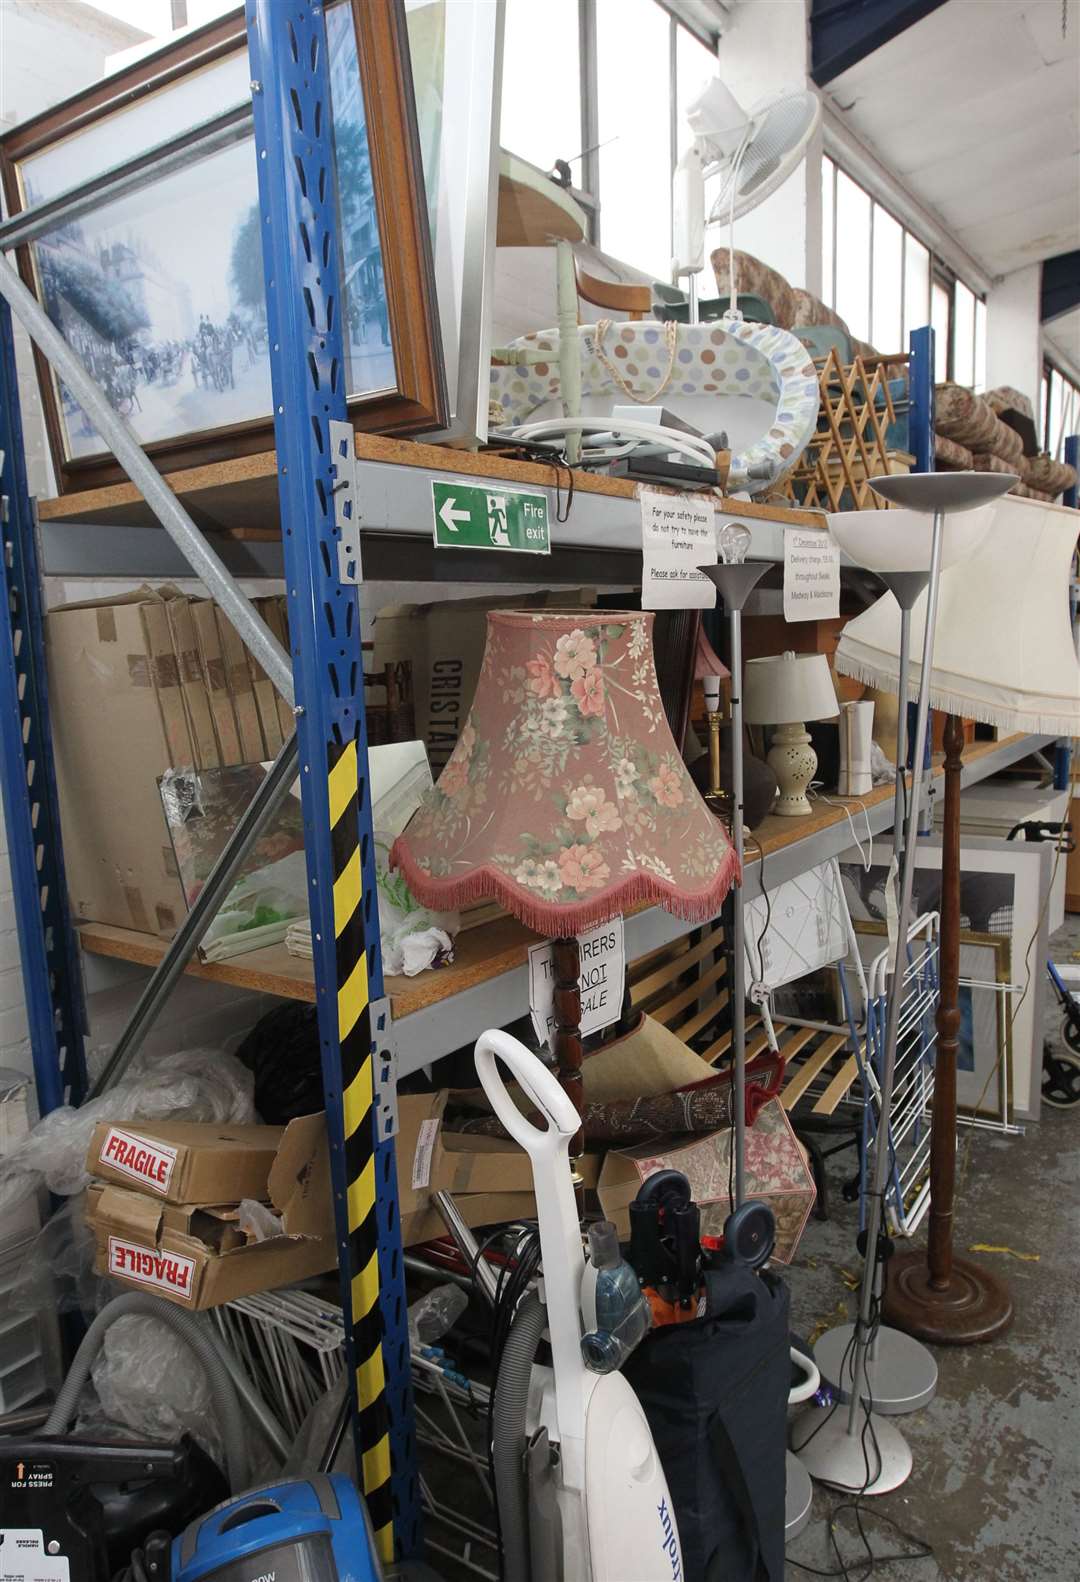 The Neighbourhood Furniture Store, on the Trinity Trading Estate in Sittingbourne, sold used items to people on low incomes Picture: John Westhrop